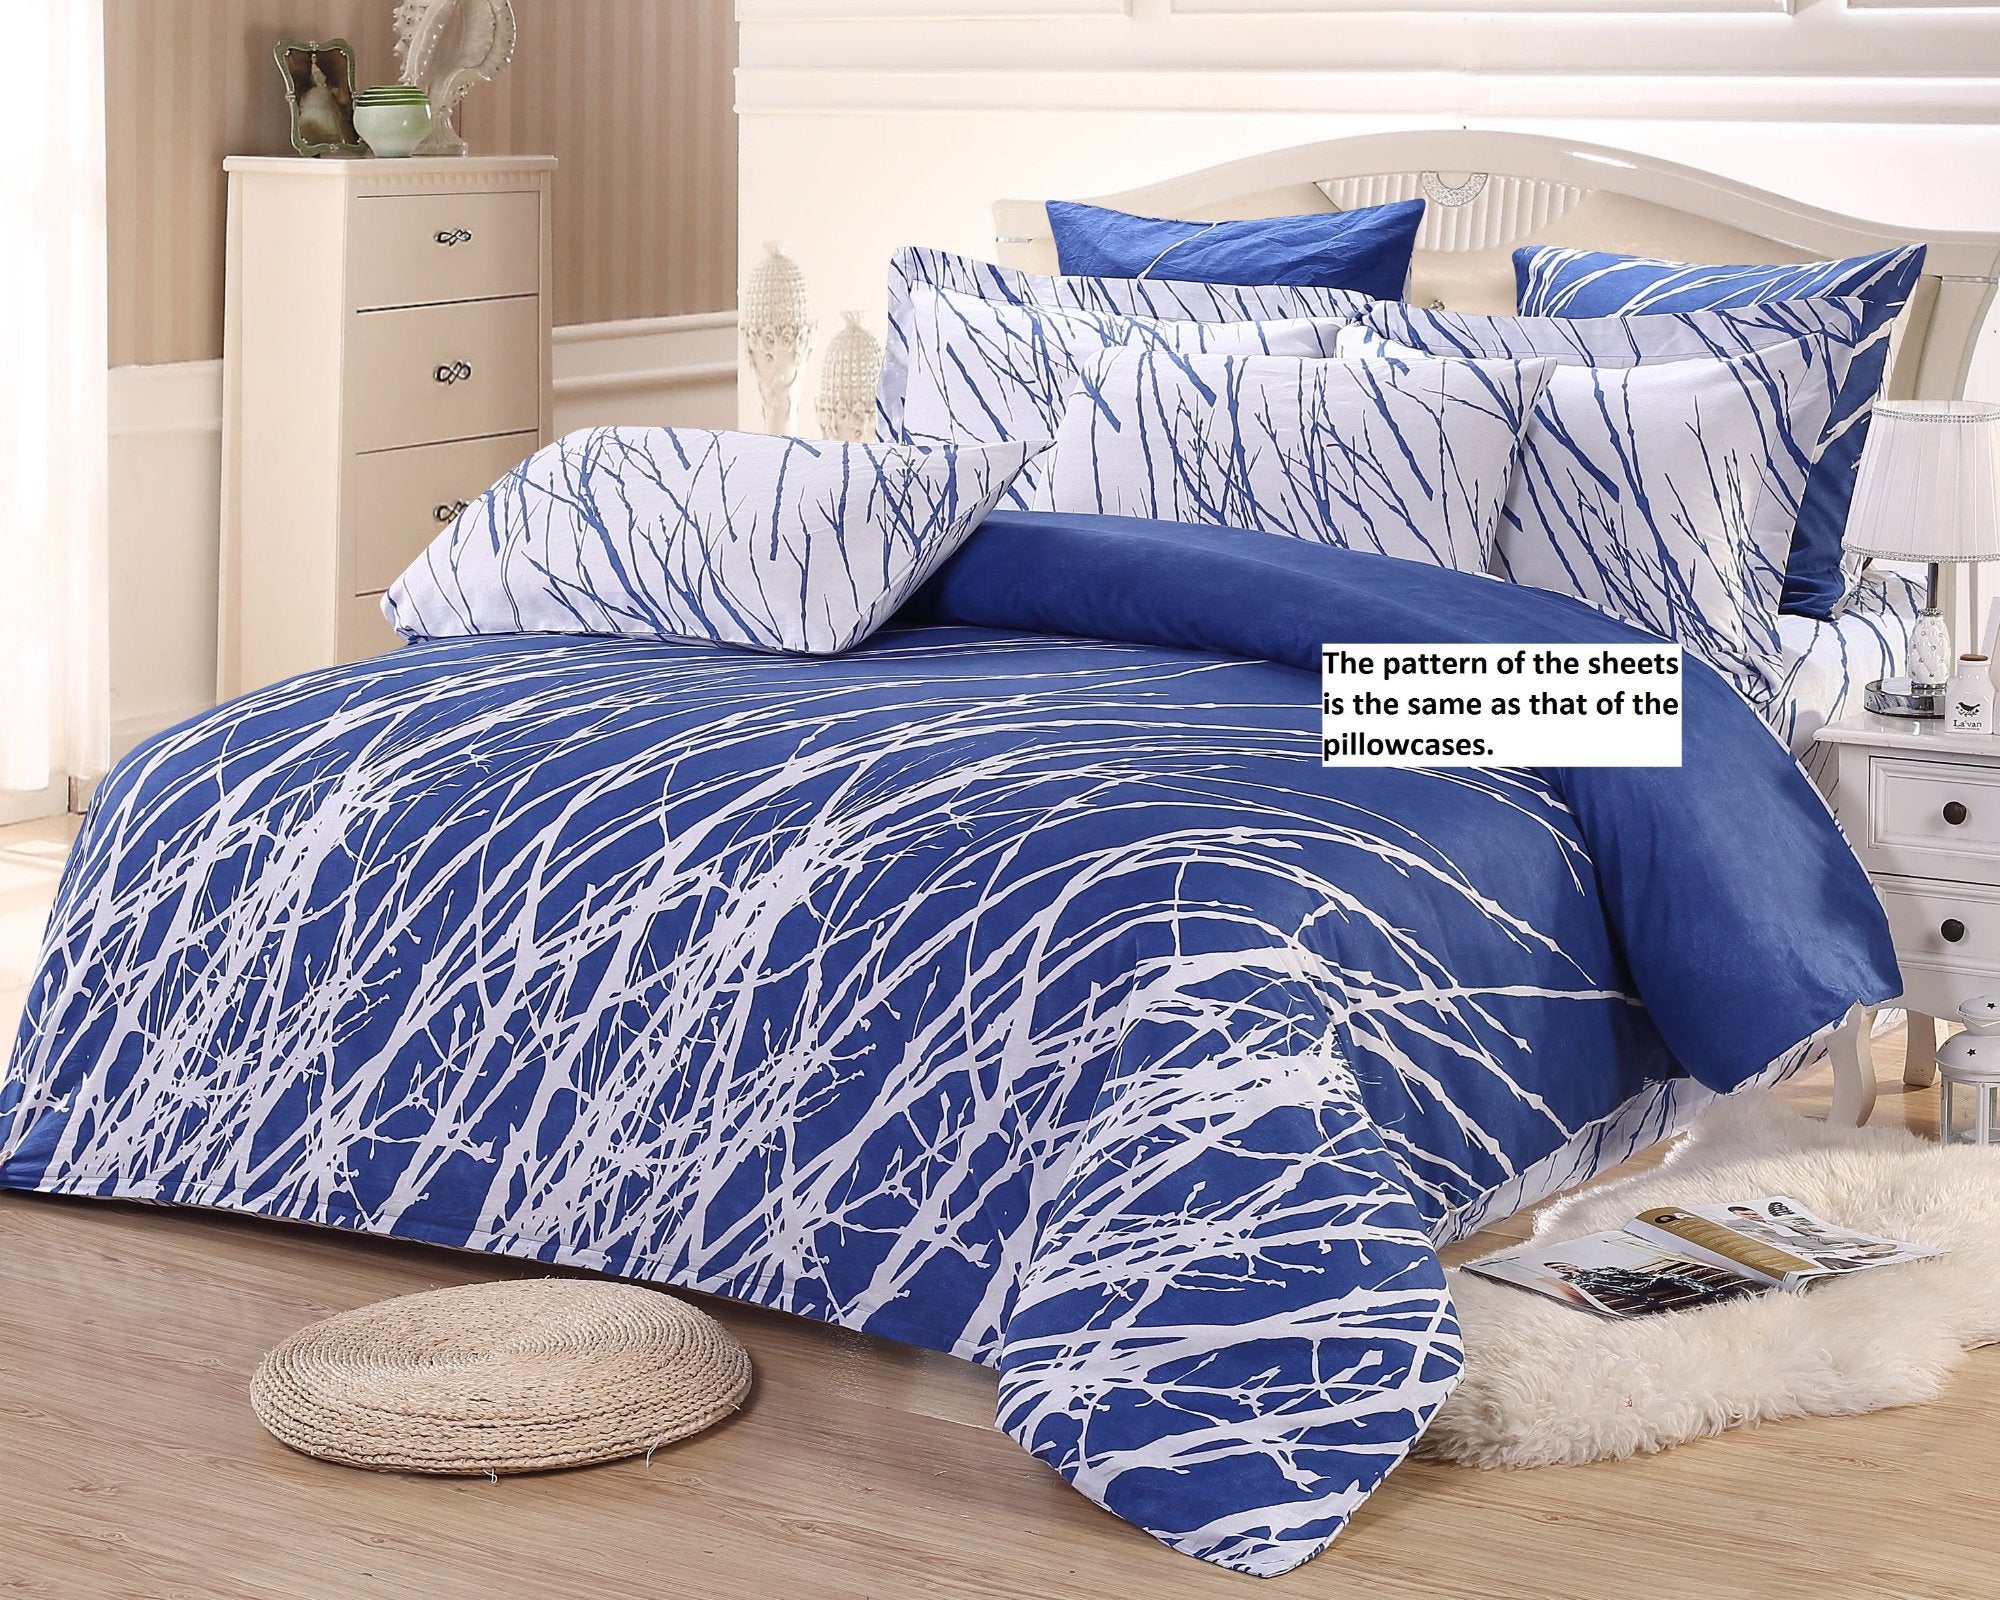 Blue tree branches sheet sets